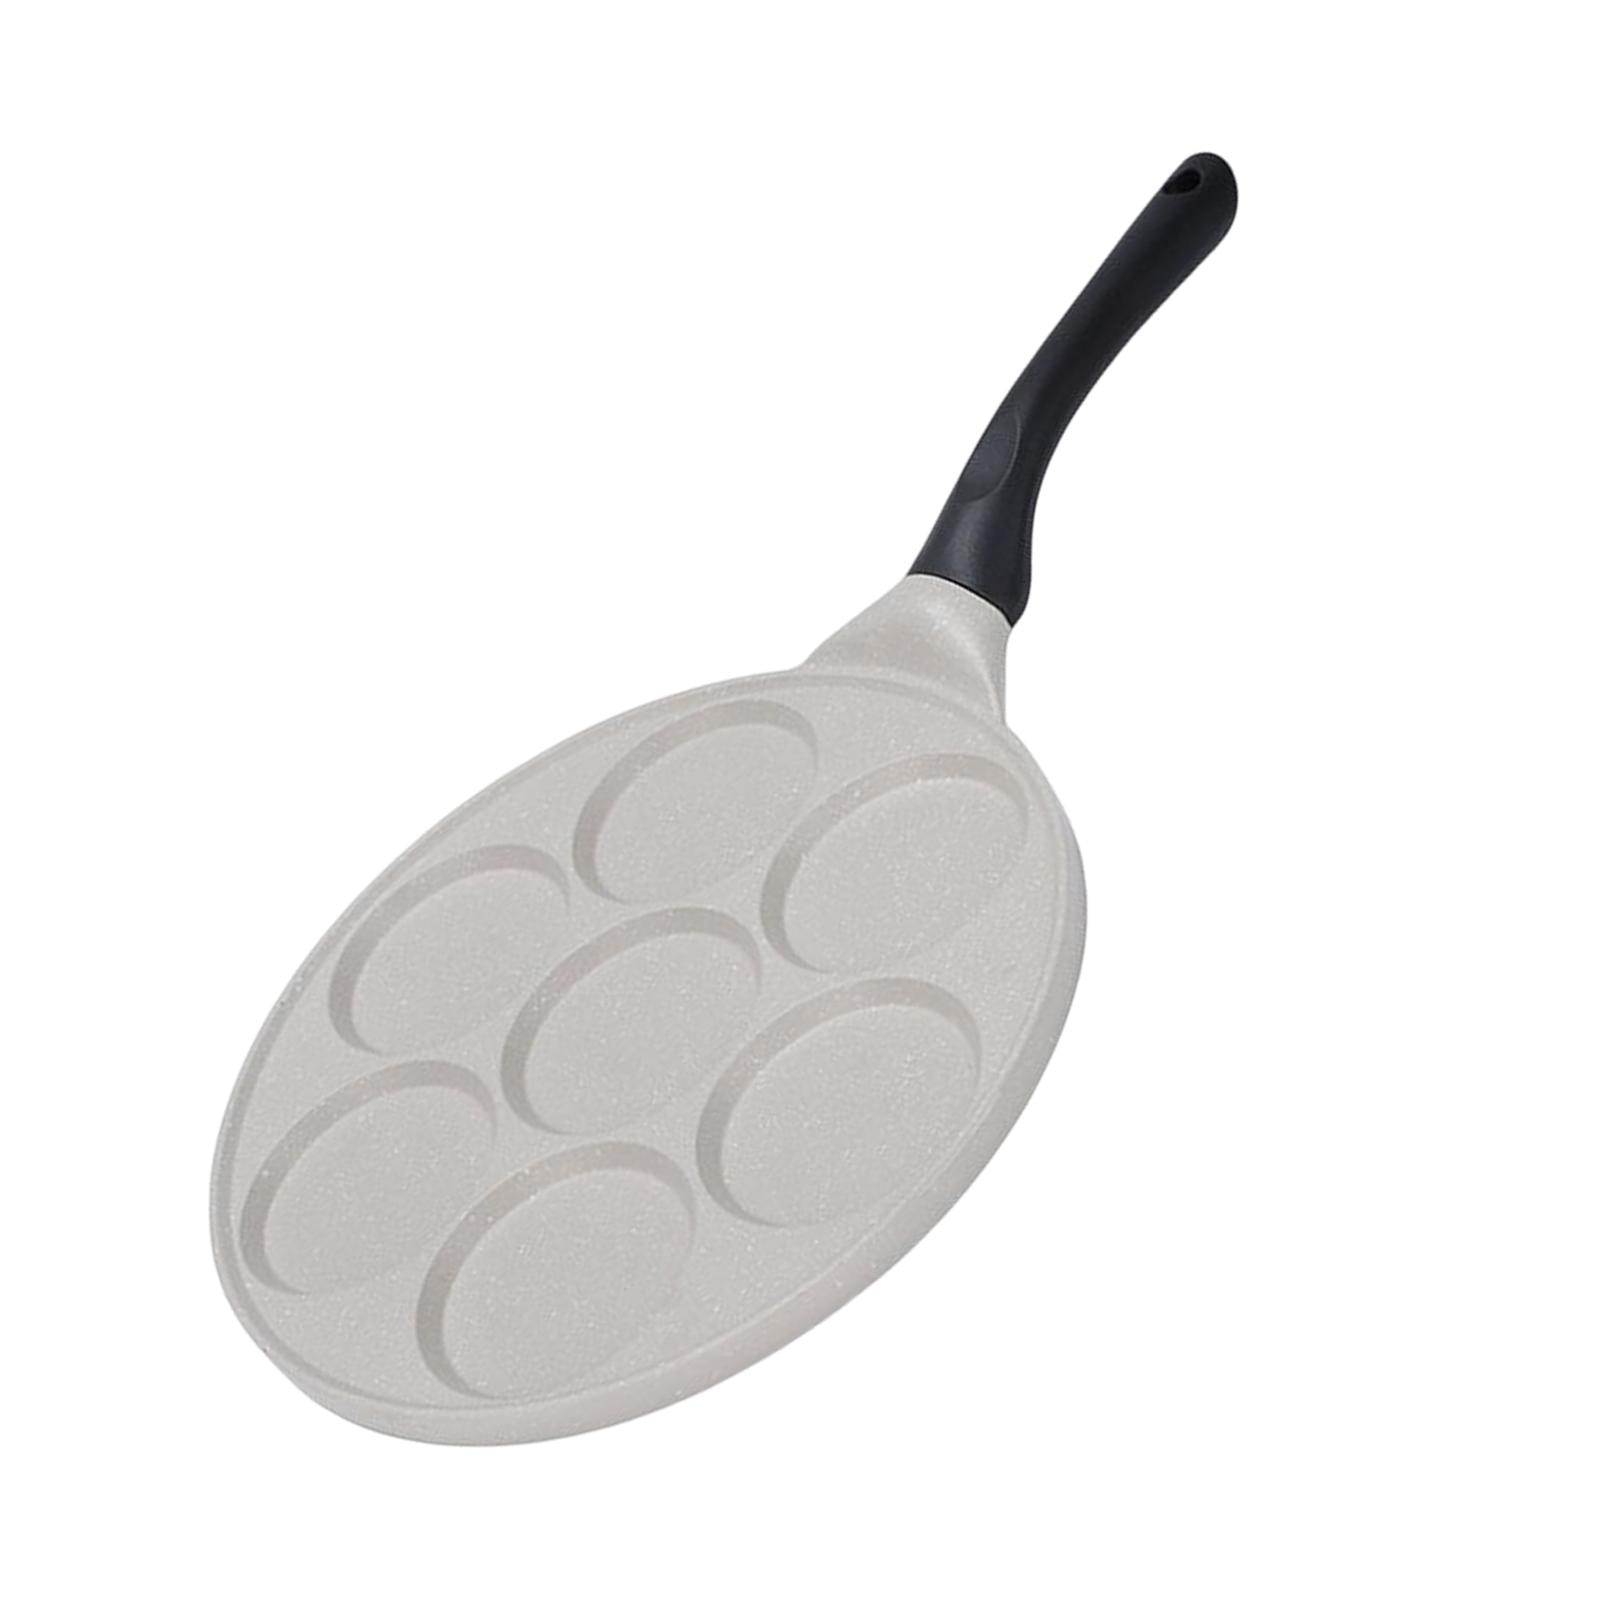 Egg Skillet for Breakfast Kitchen Cooking Tool Divided Grill Frying Pan Mini Pancake Pan Egg Frying Pan for Baking Breakfast